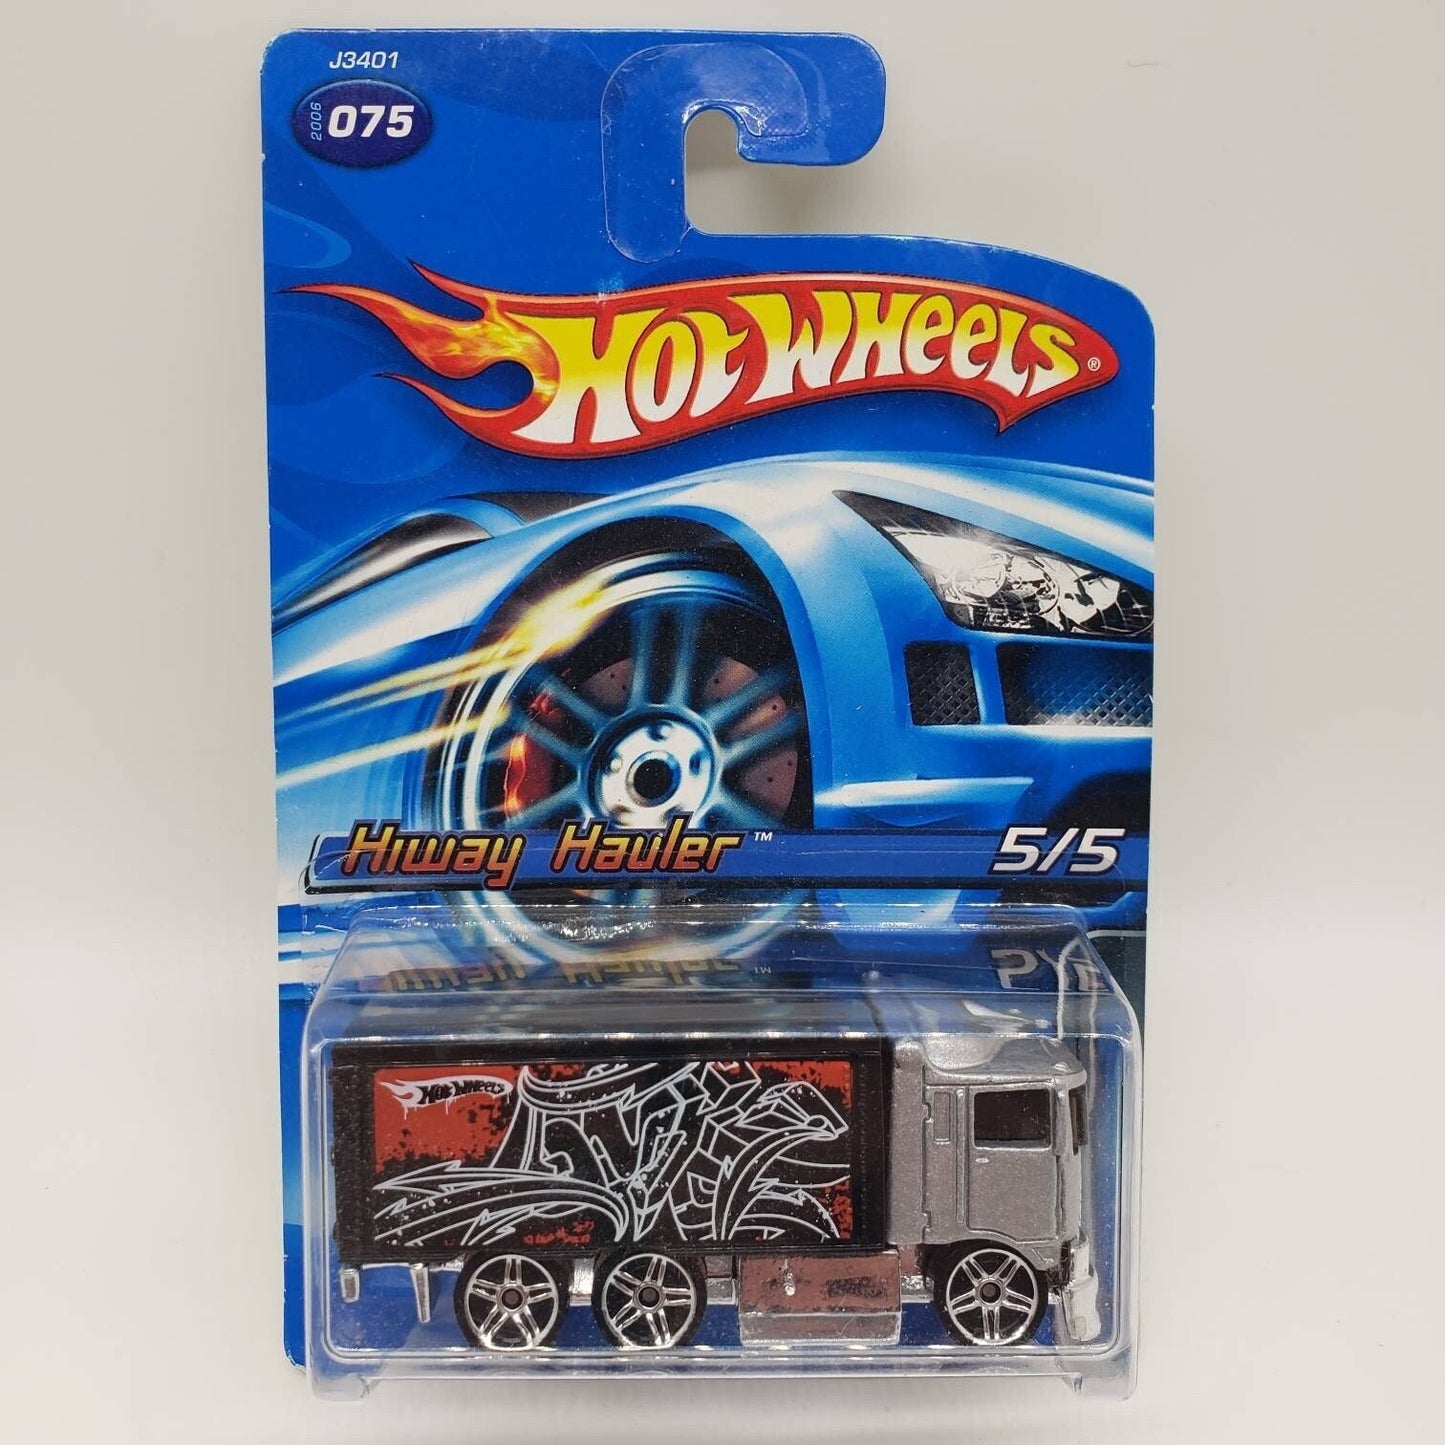 Hiway Hauler - Delivery Truck - Moving Truck - Diecast Metal Car - Model Toy Car - Hot Wheels